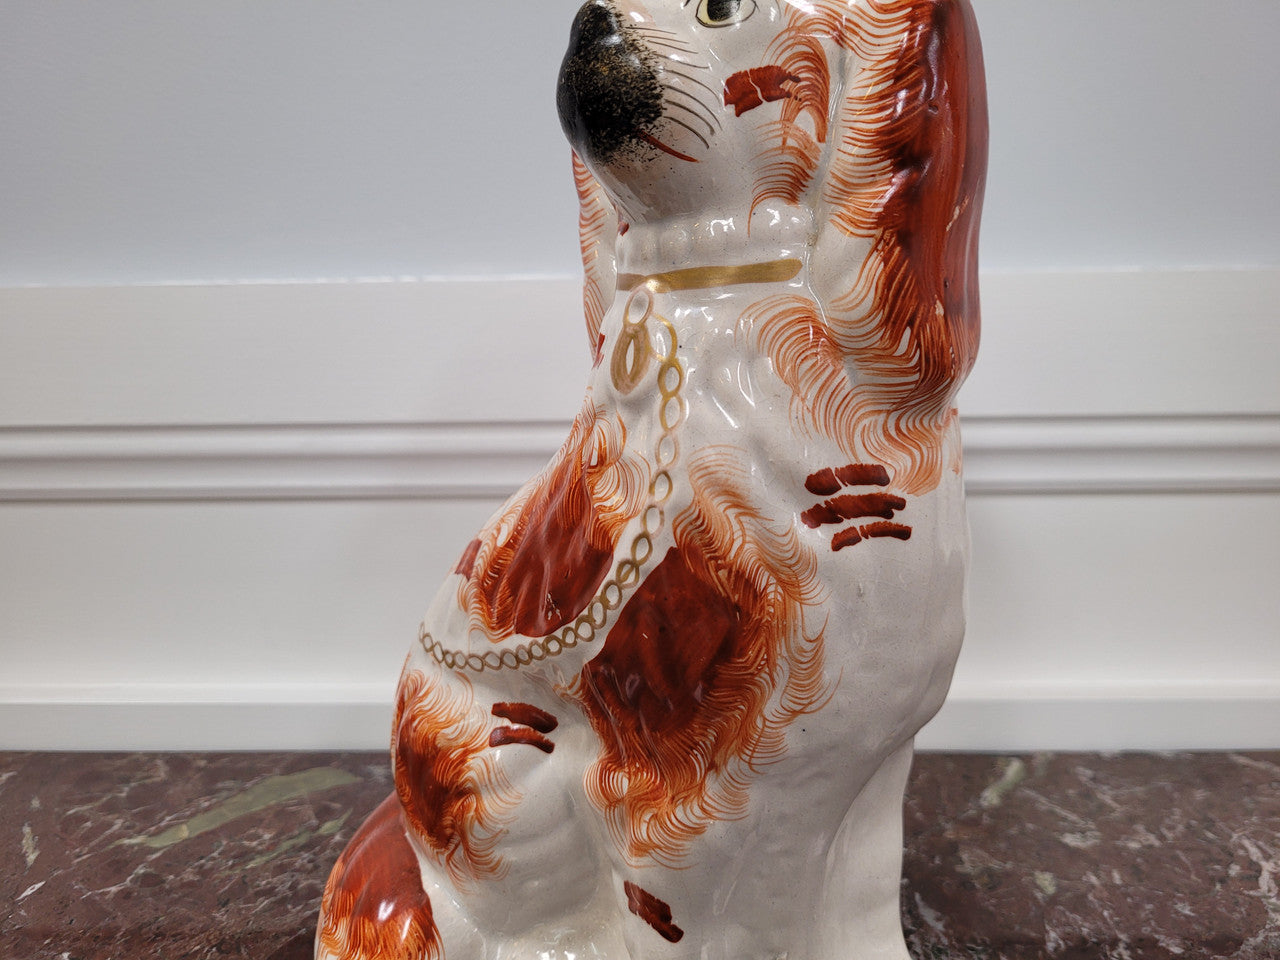 Antique Staffordshire dog statue. Please view photos as they help form part of the description.